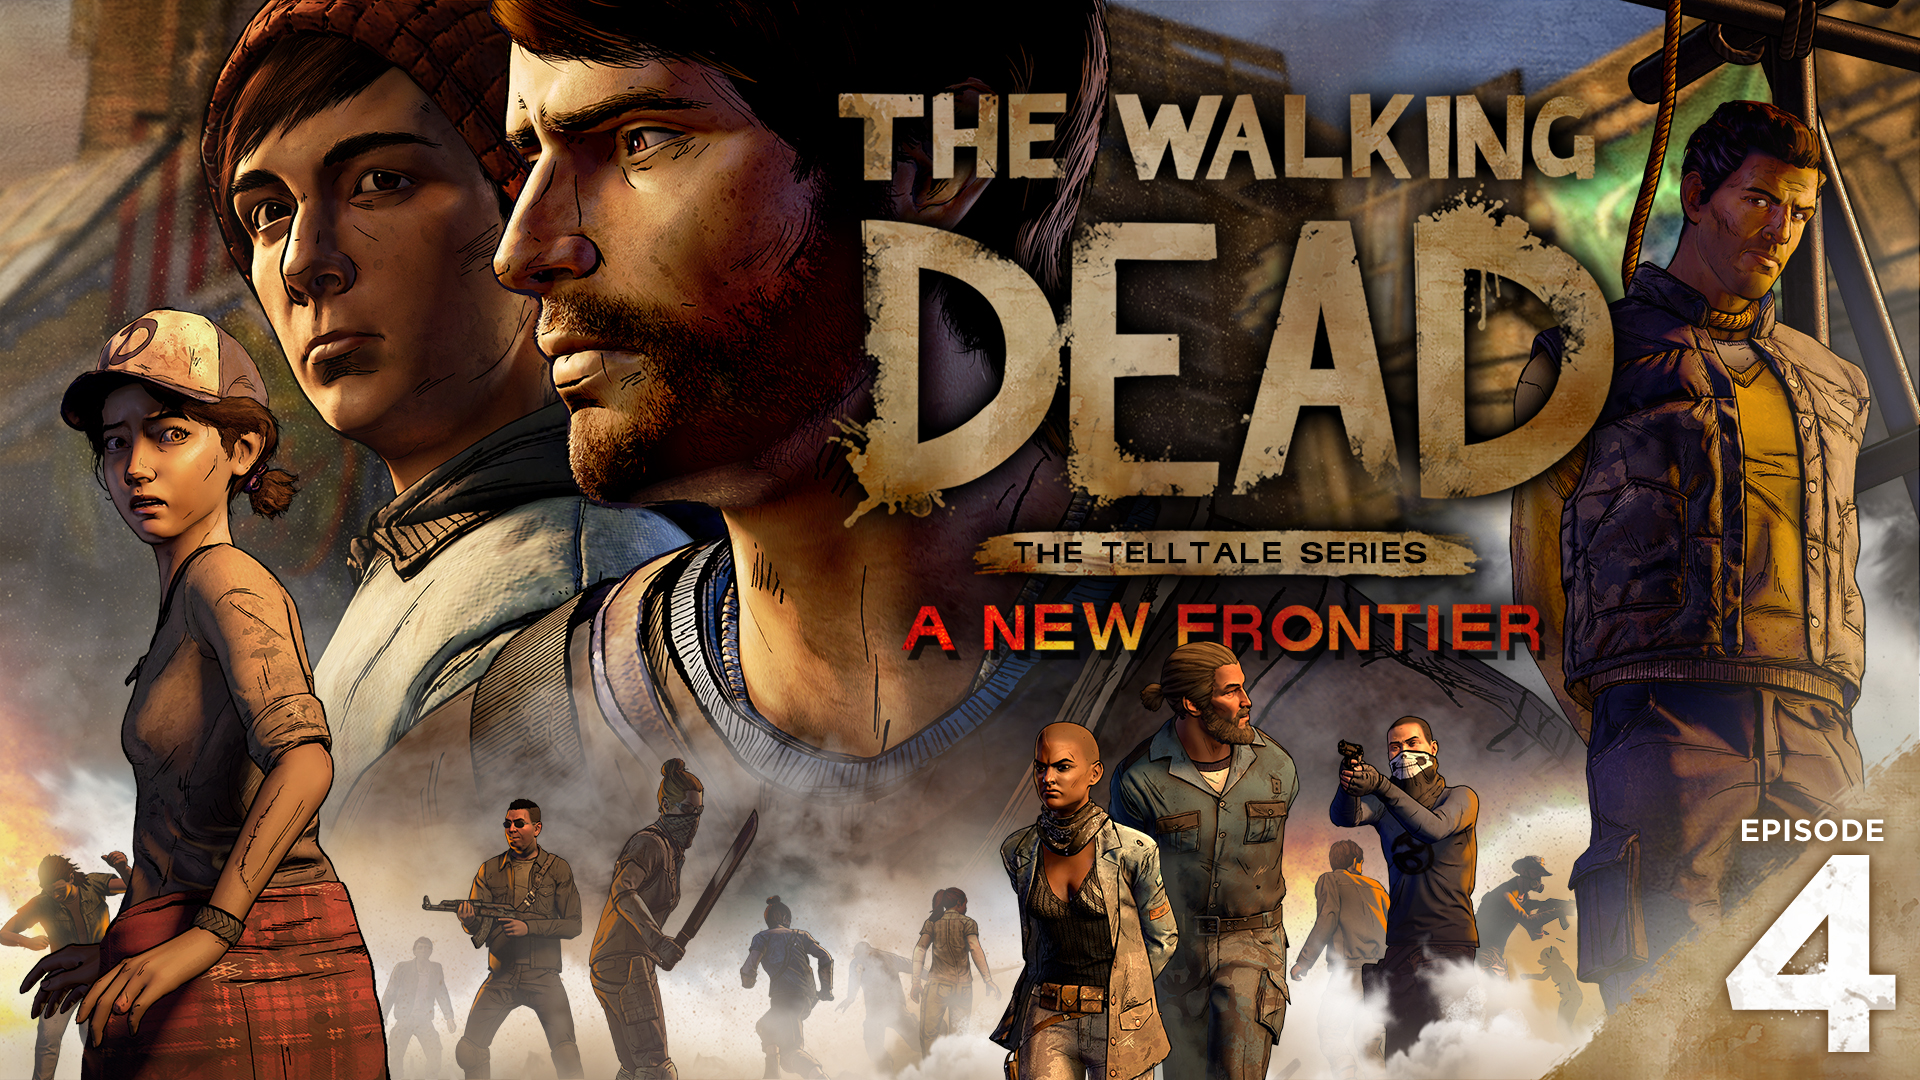 Episode 4 of The Walking Dead: A New Frontier now available